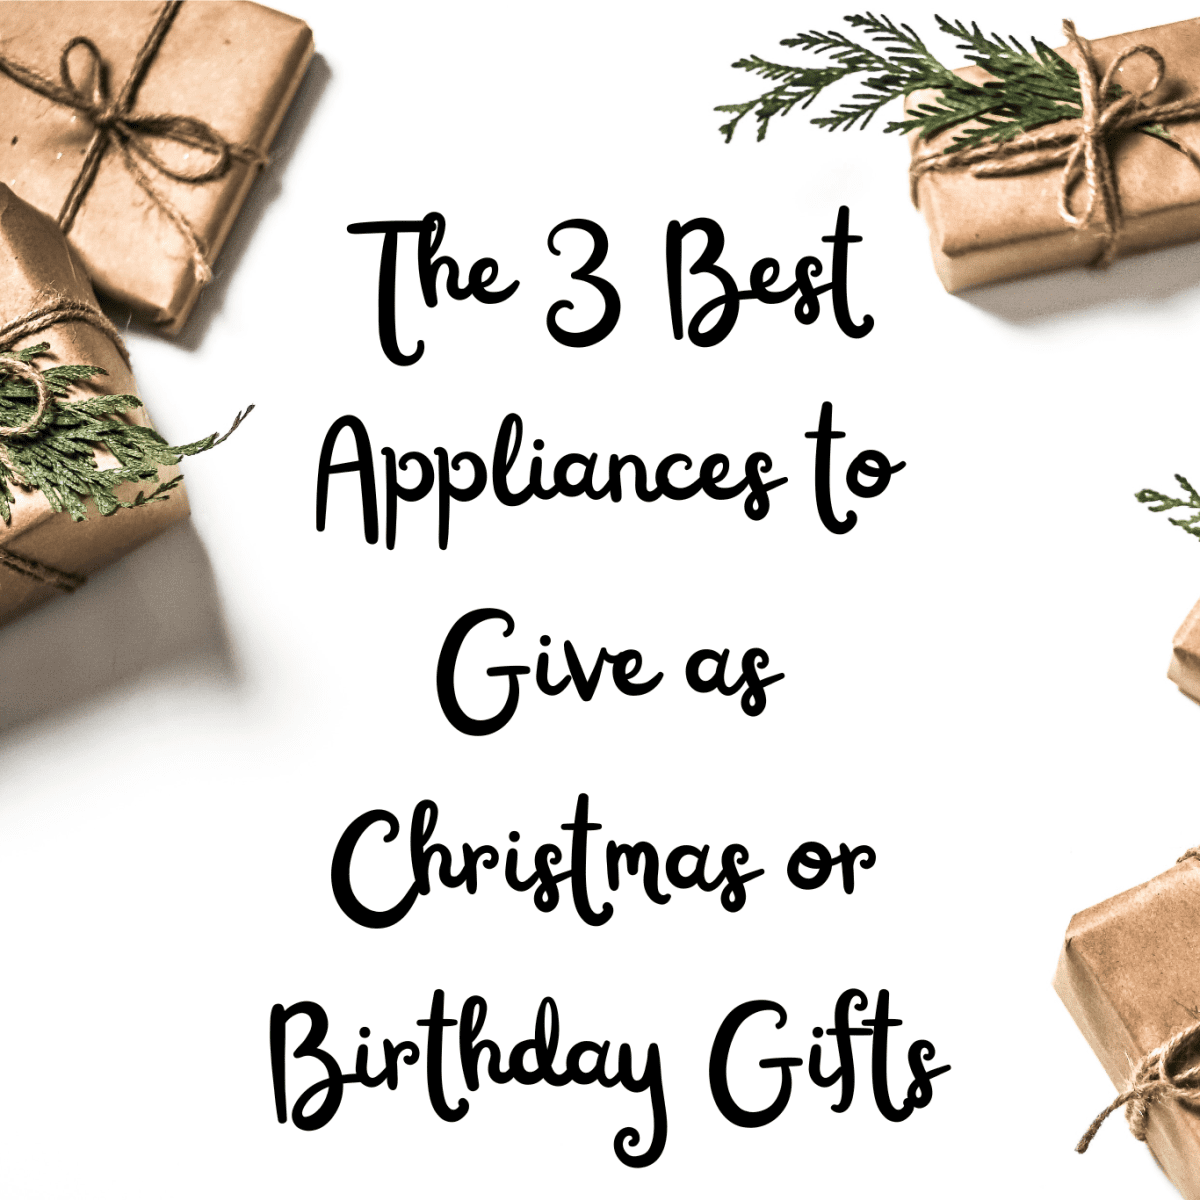 5 Best Birthday Gifts you can give to anyone - The Caratlane